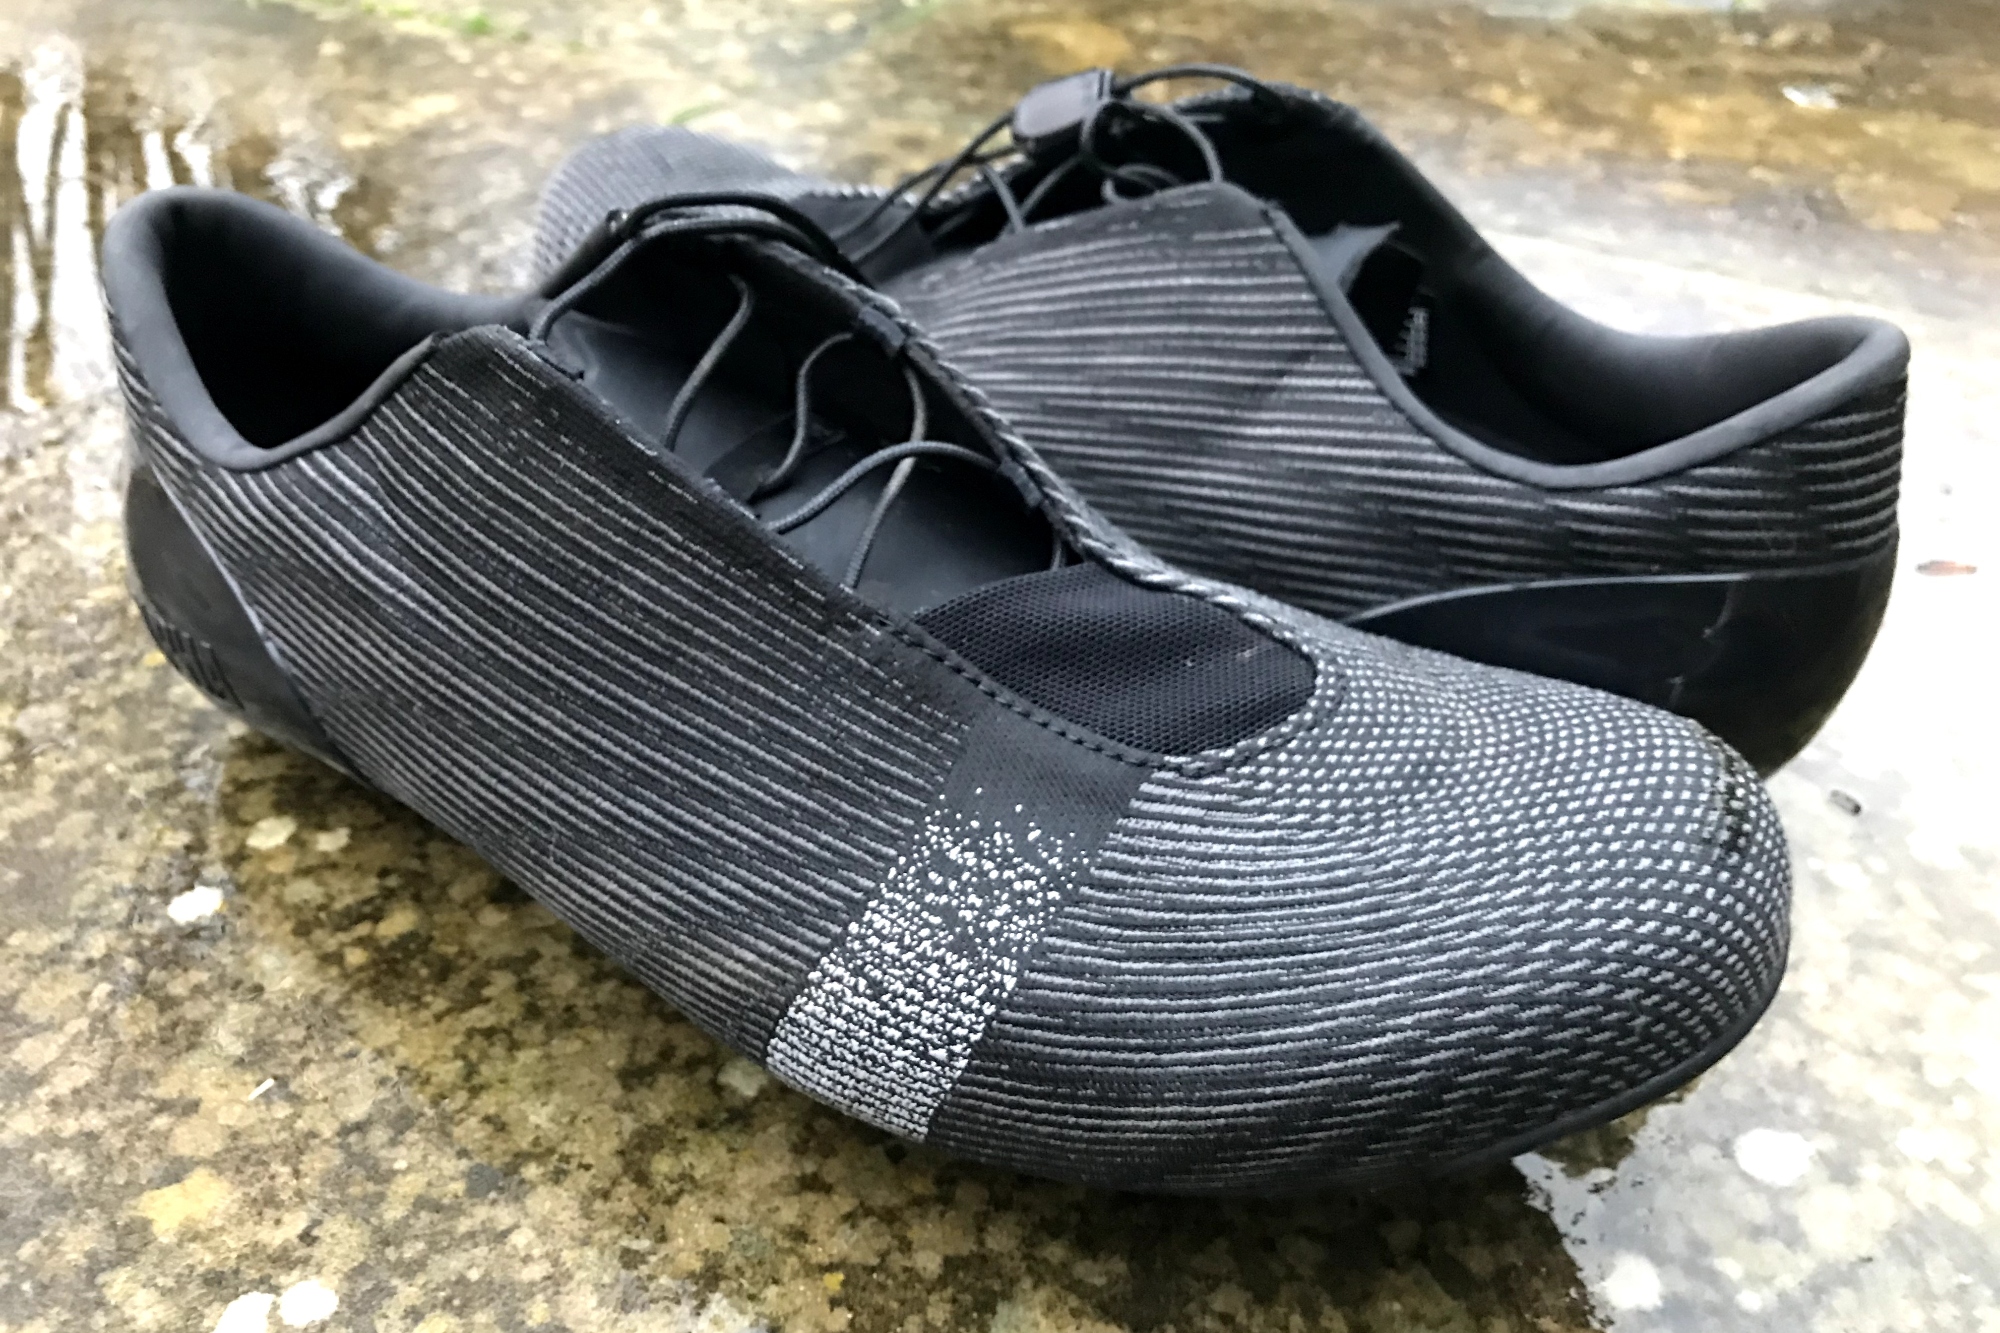 Rapha Pro Team Lace Up Cycling Shoes review – more 'racing' than ...